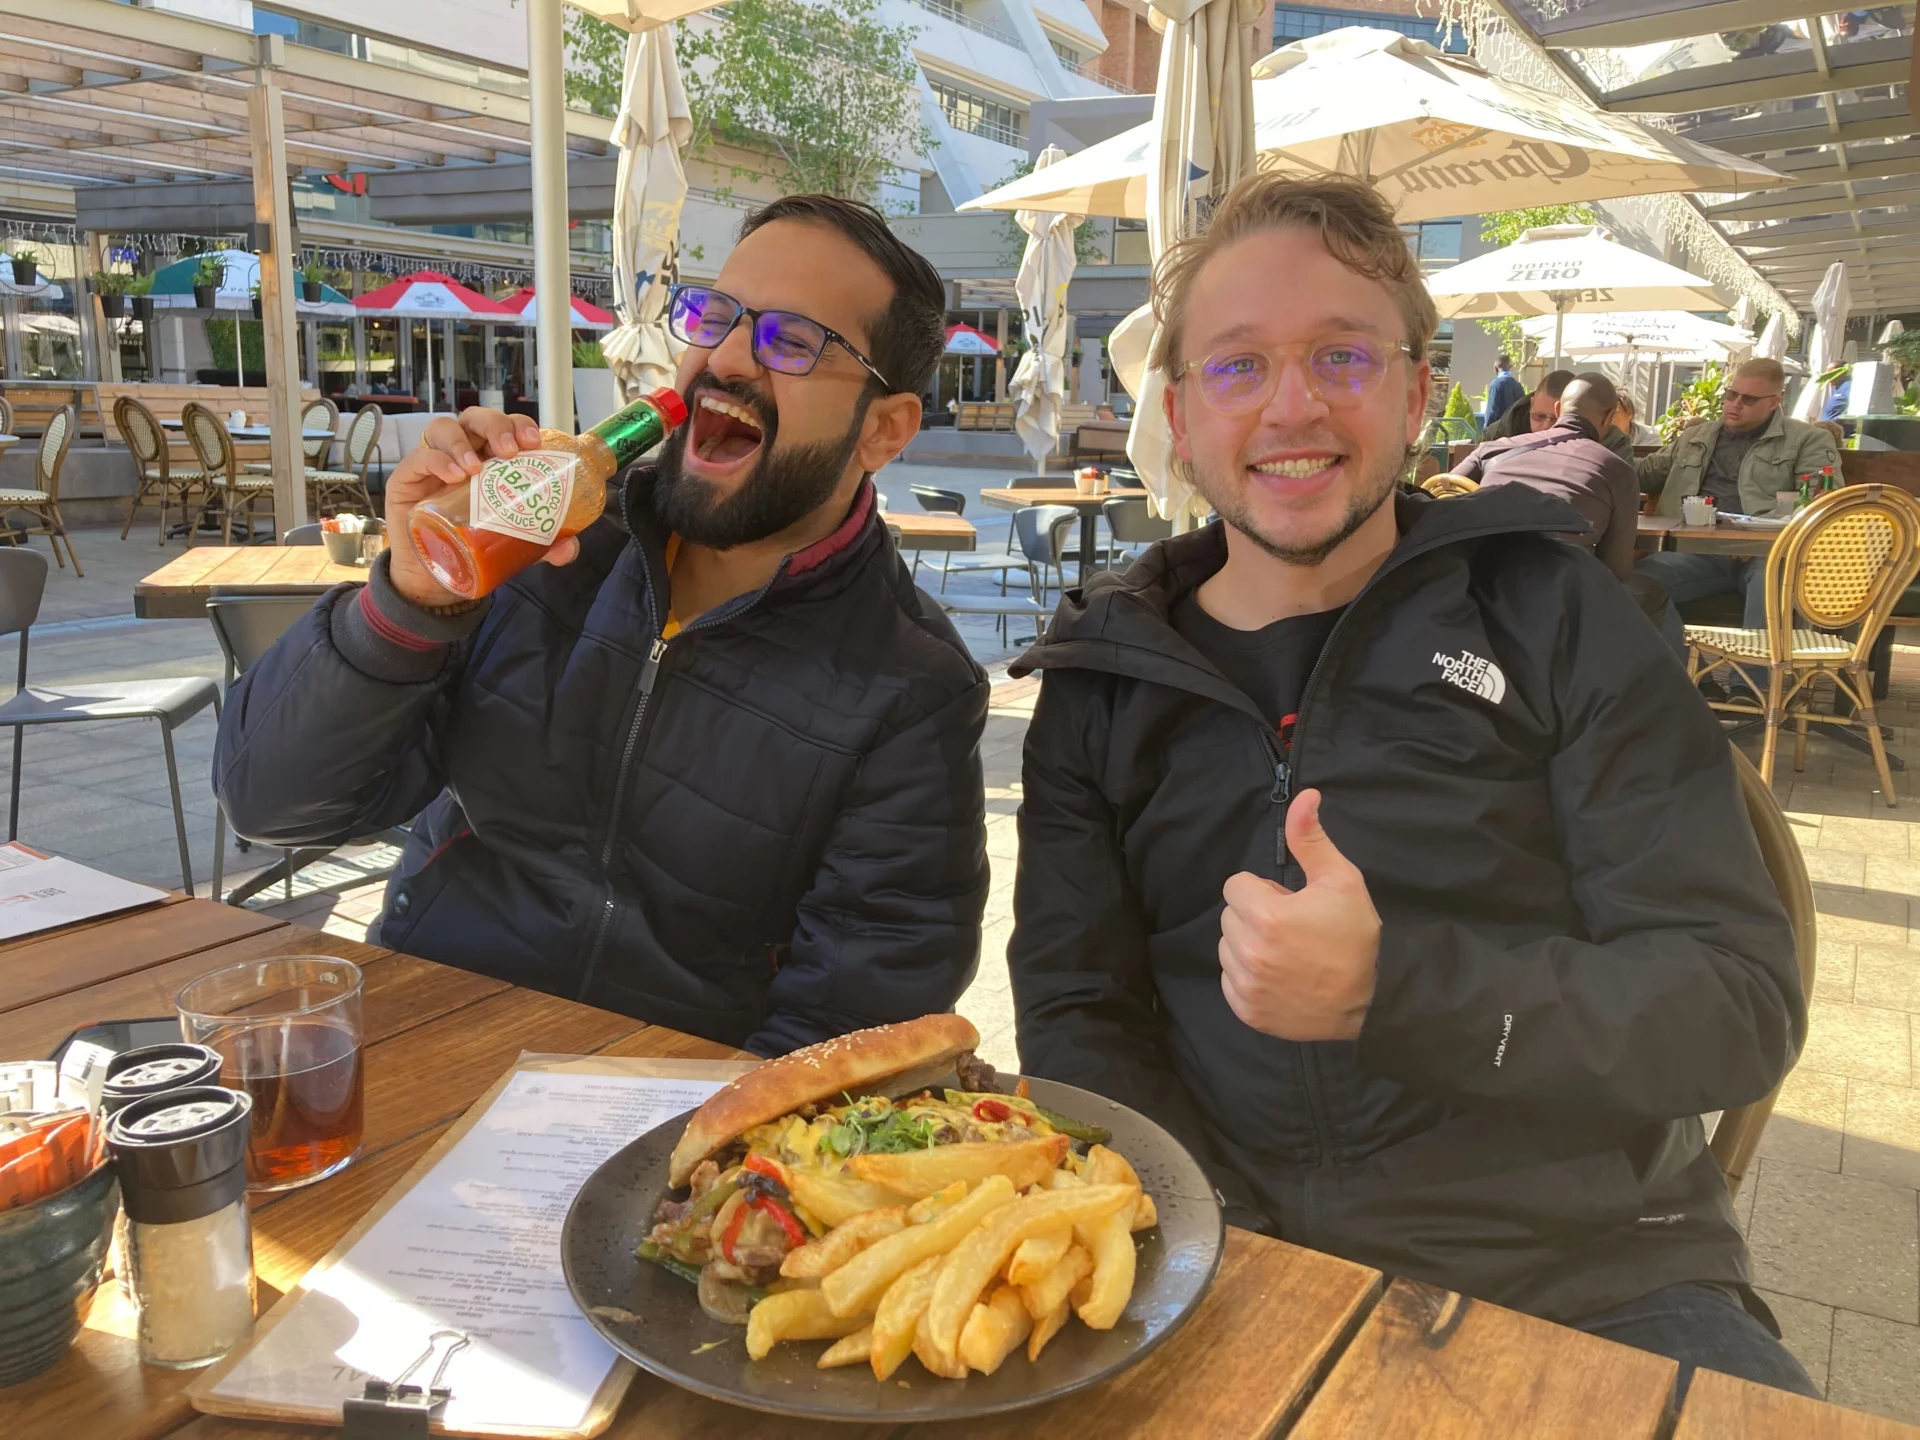 Jason and Yeeshu enjoying lunch during a break from project work. The is a big plate of sandwich and chips on the table, Jason looks very happy about it.